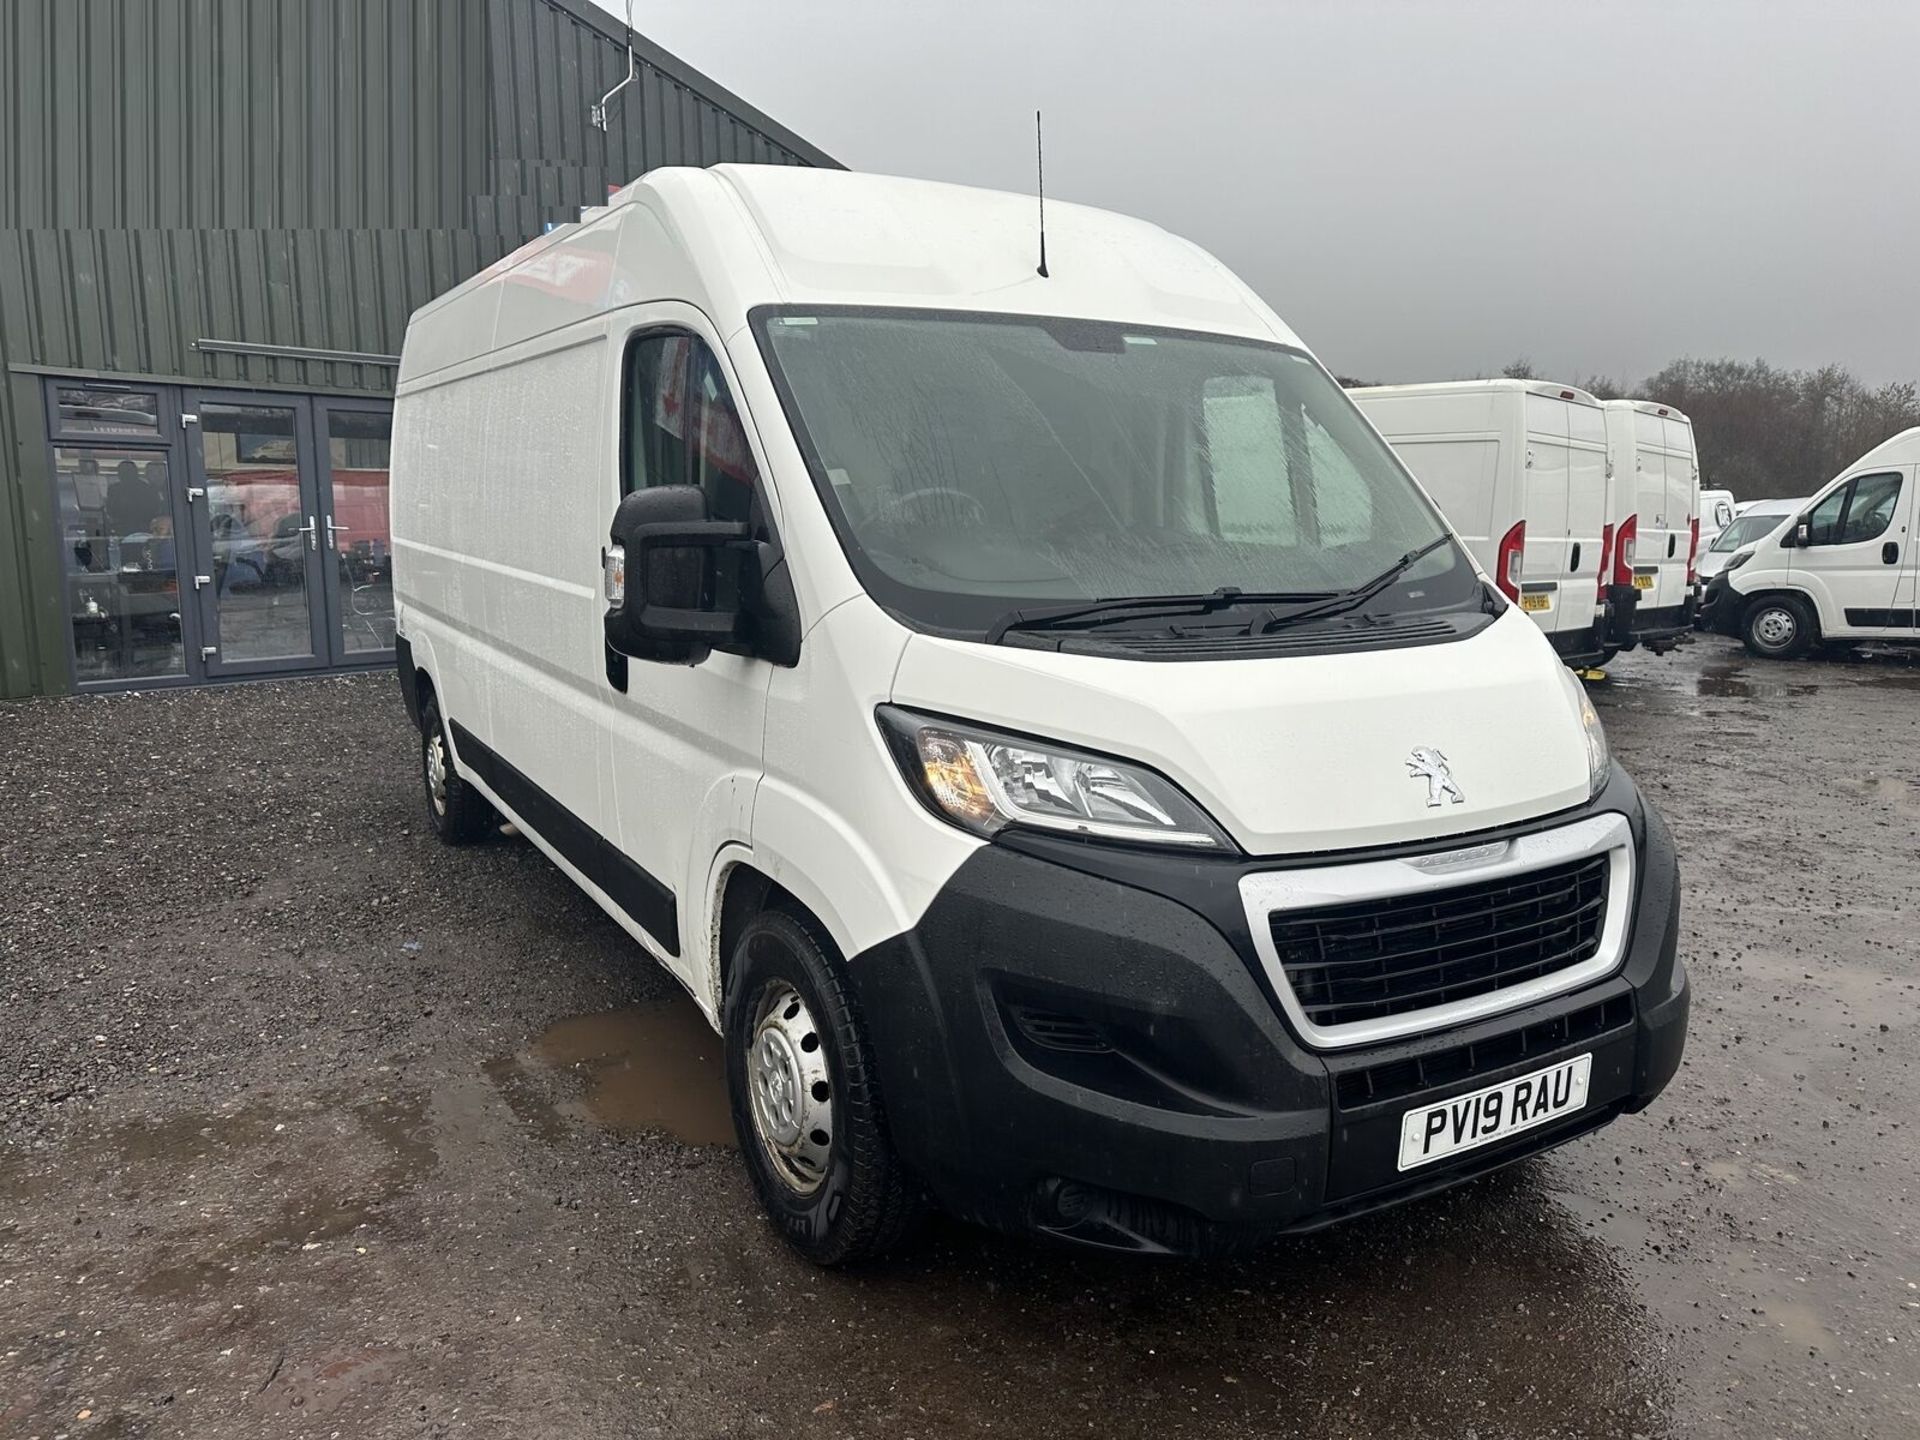 FORECOURT FIND: 2019 PEUGEOT BOXER PROFESSIONAL VAN, FULL HISTORY - Image 4 of 14